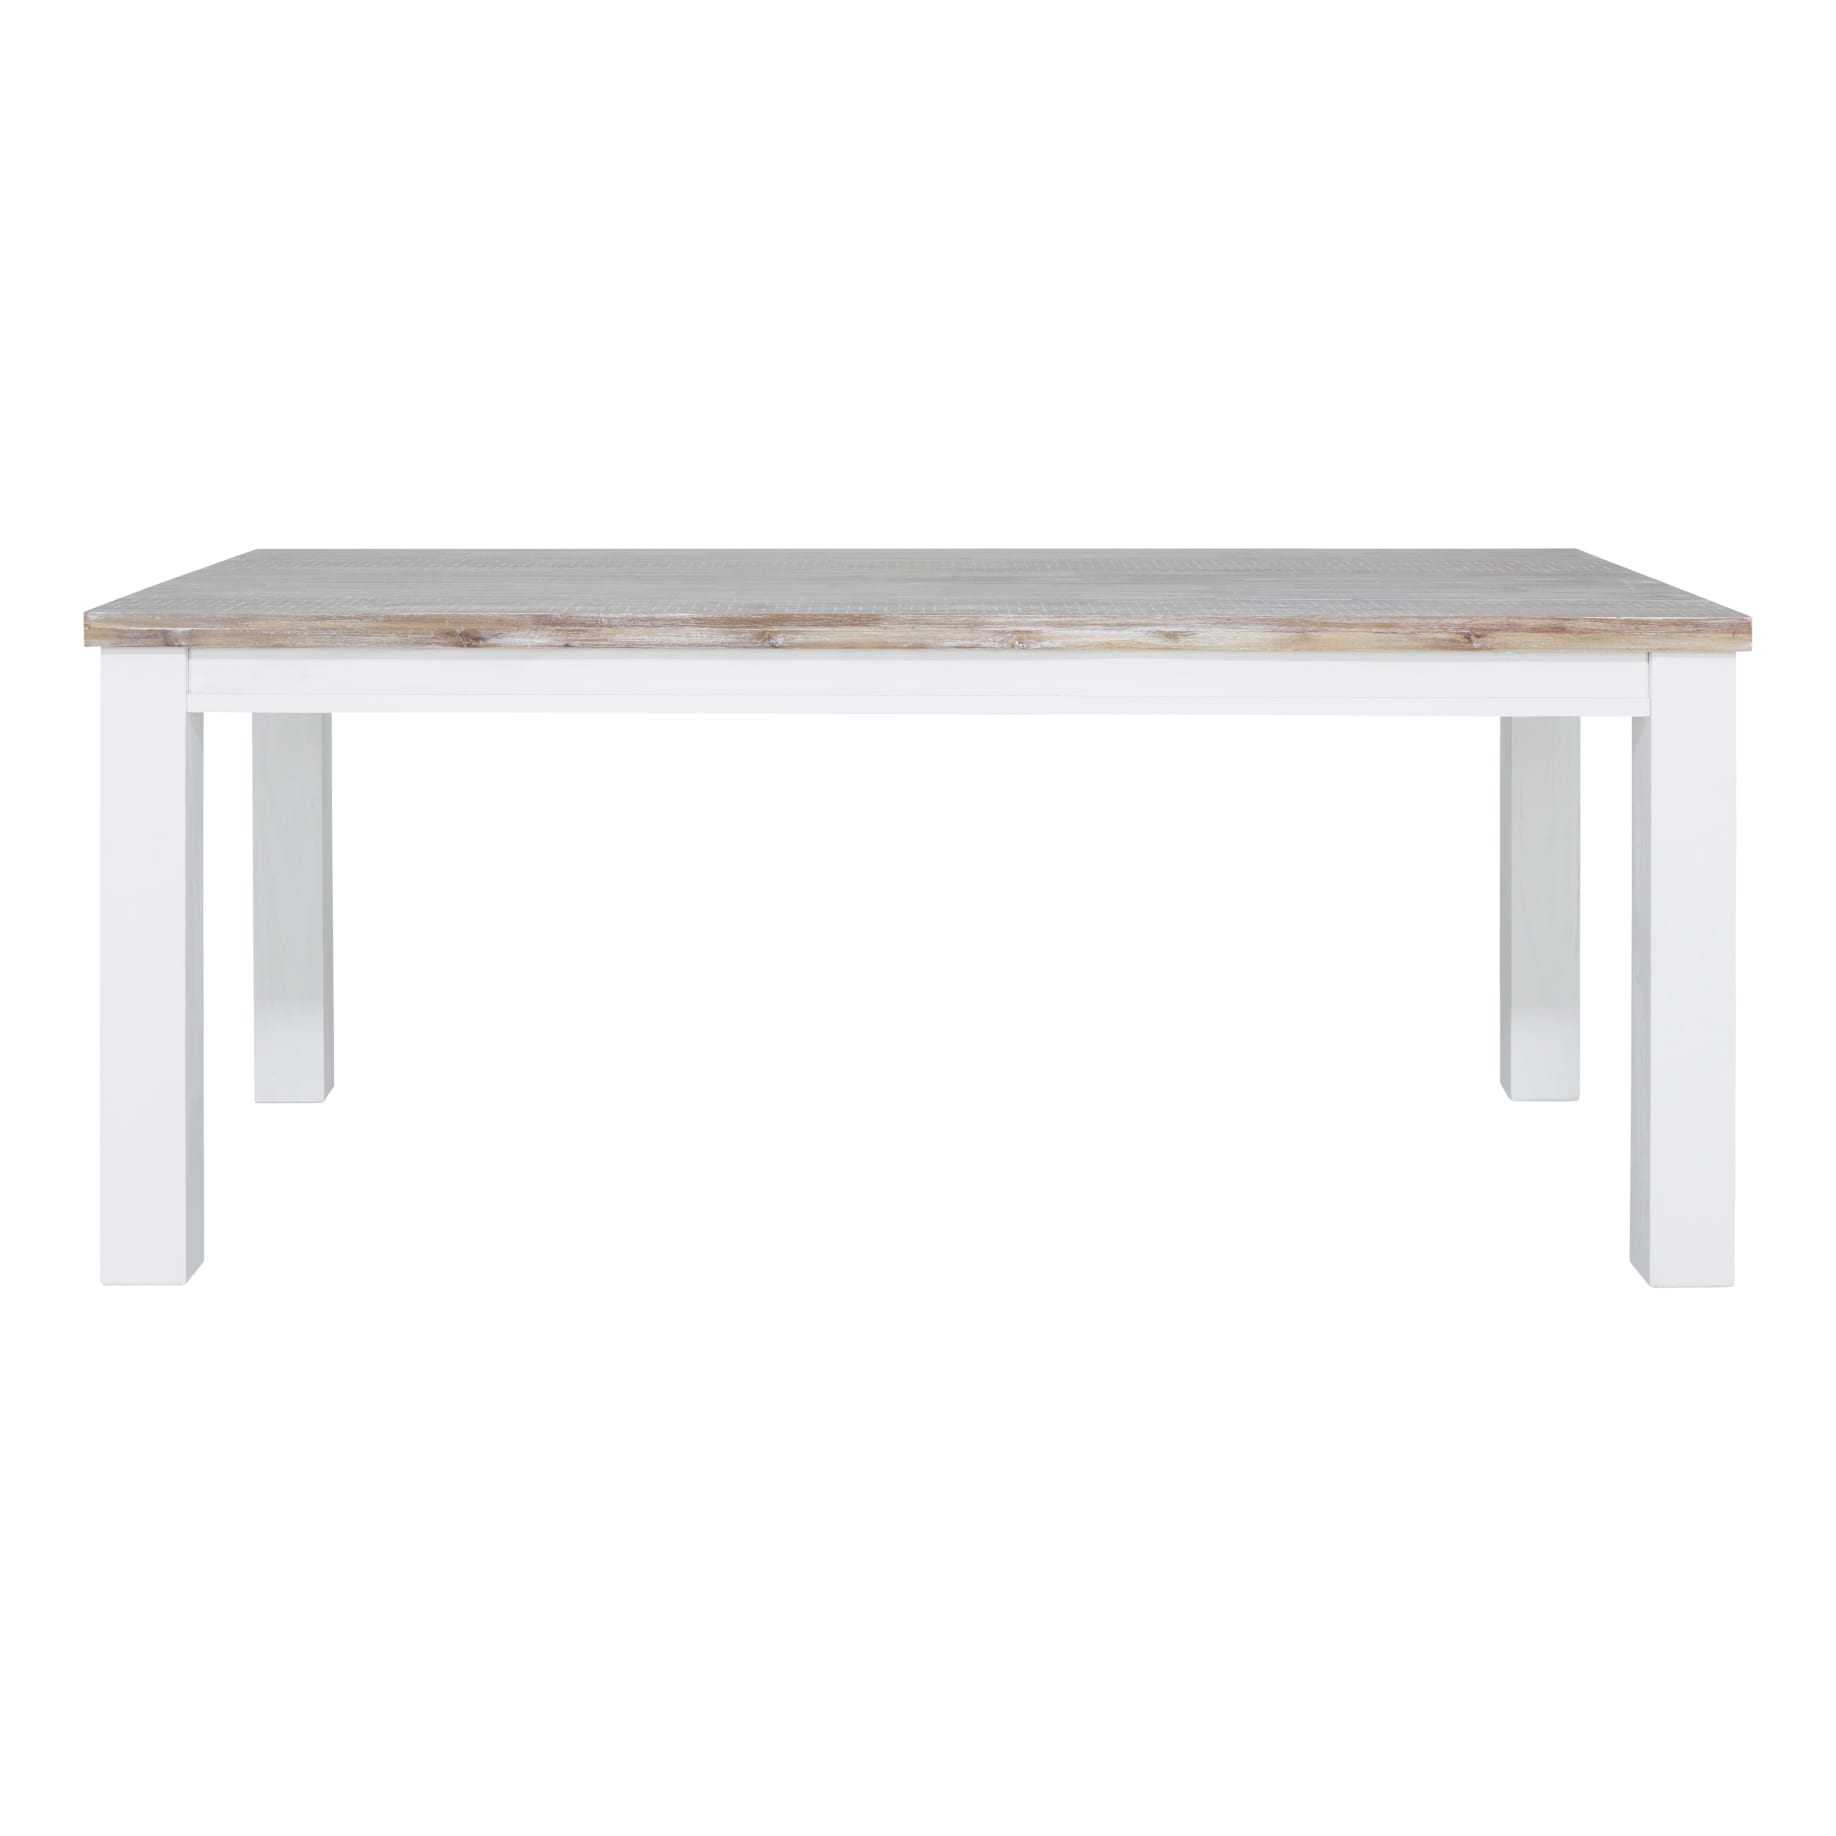 Halifax Dining Table 190cm in Acacia Timber Grey